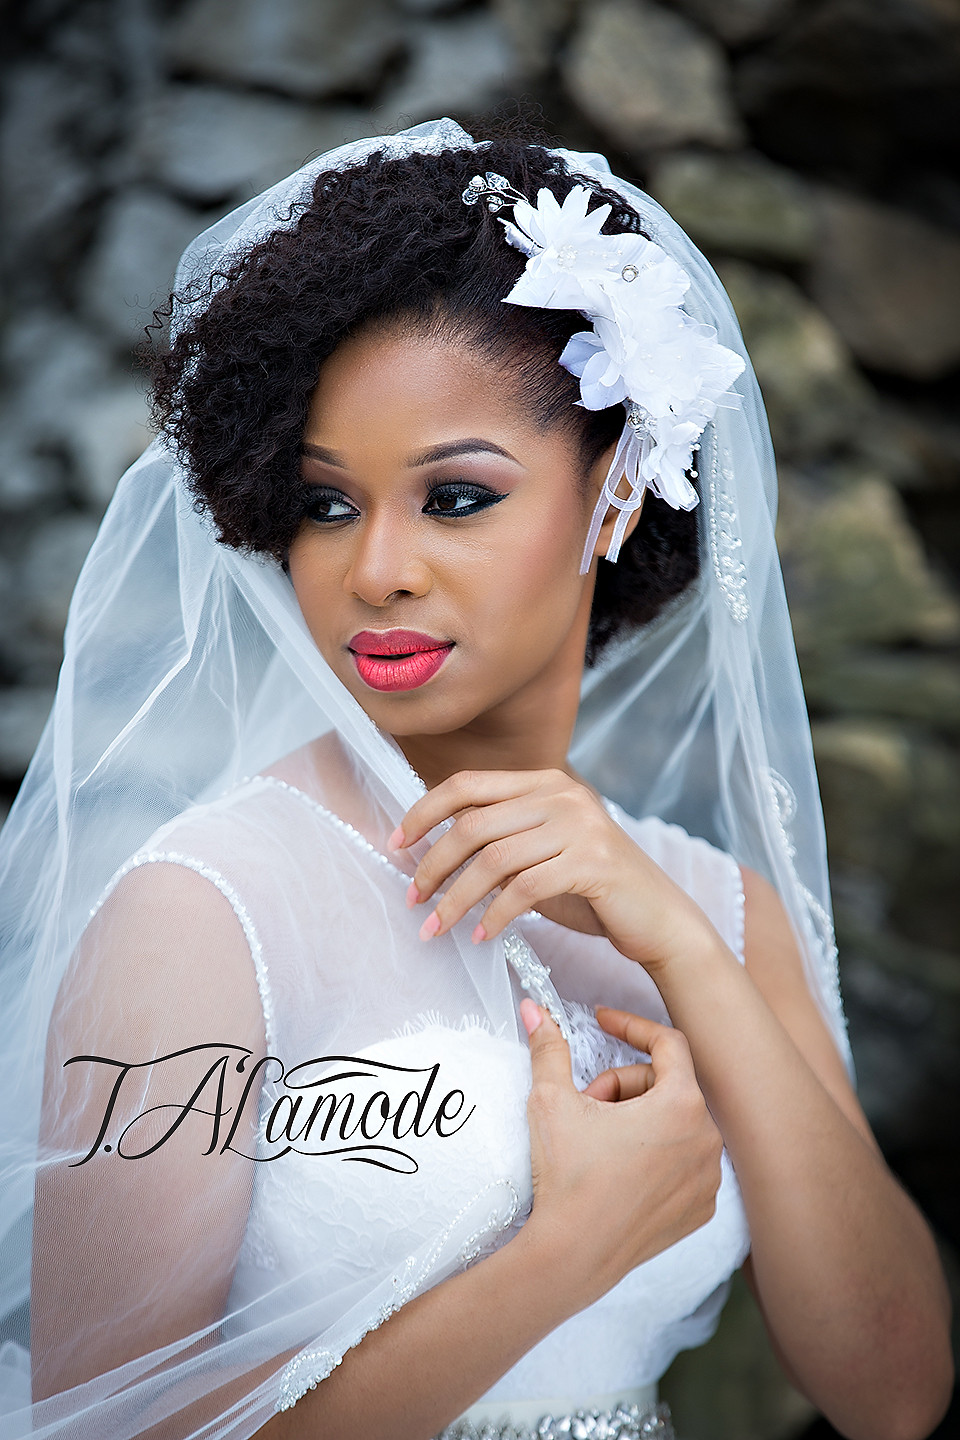 Black Natural Wedding Hairstyles
 Striking Natural Hair Looks for the 2015 Bride T Alamode